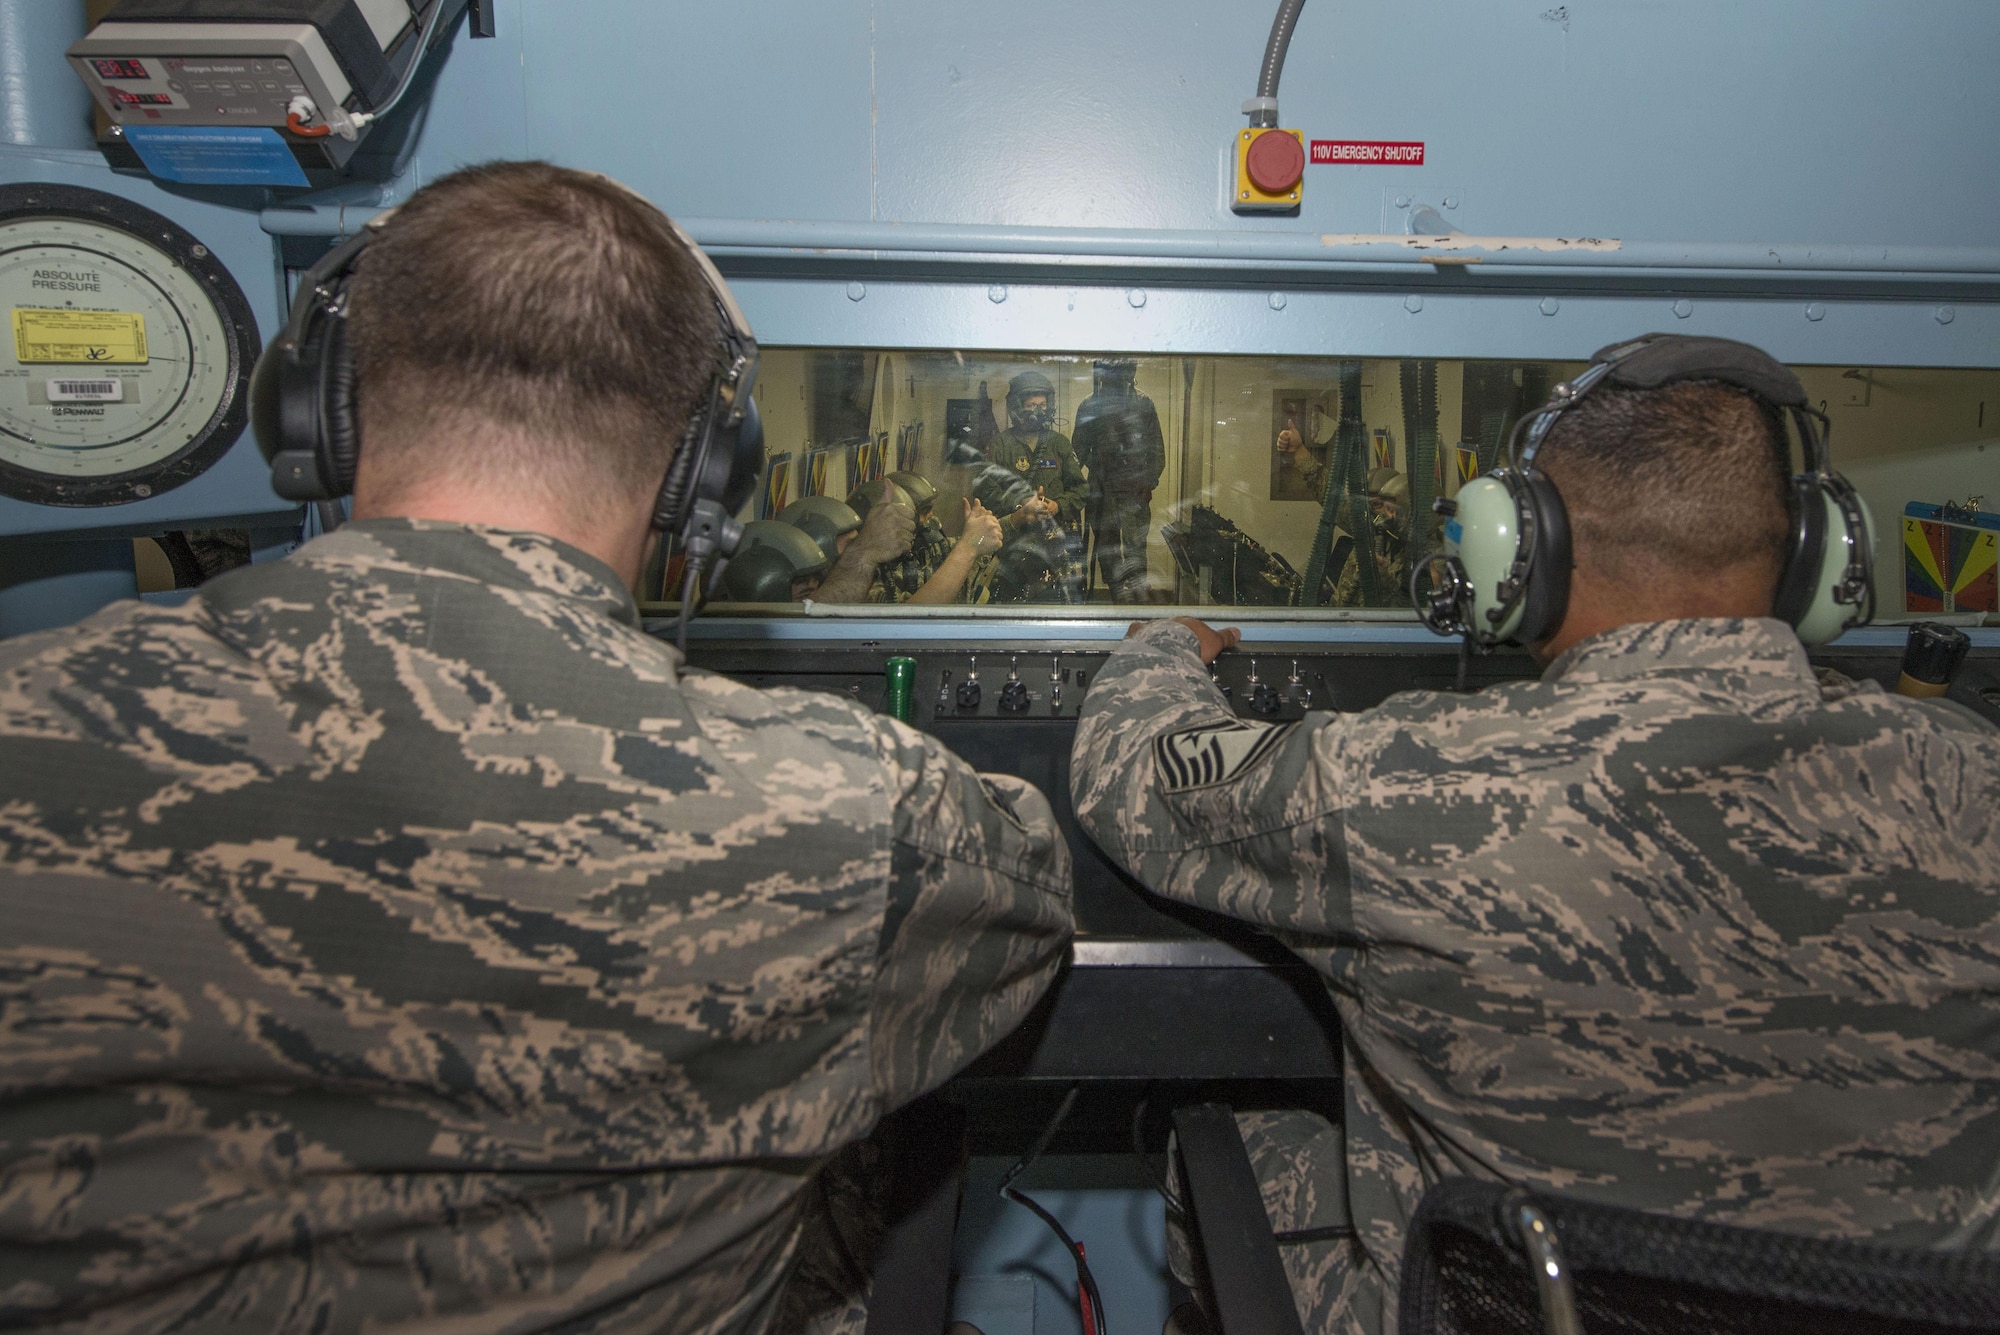 U.S. Air Force Tech. Sgt. Daniel Zerbe, (left) School of Aerospace Medicine operational physiology technician and Senior Master Sgt. Paul Johal (right), USAFSAM operational physiology superintendent, observe hypoxia demo training from the outside of the altitude hypobaric chamber during training at Wright-Patterson Air Force Base, Ohio, April 26, 2017. The hypobaric chamber provides a training system which replicates the effects of barometric pressure change on the human body. (U.S. Air Force photo/Michelle Gigante)